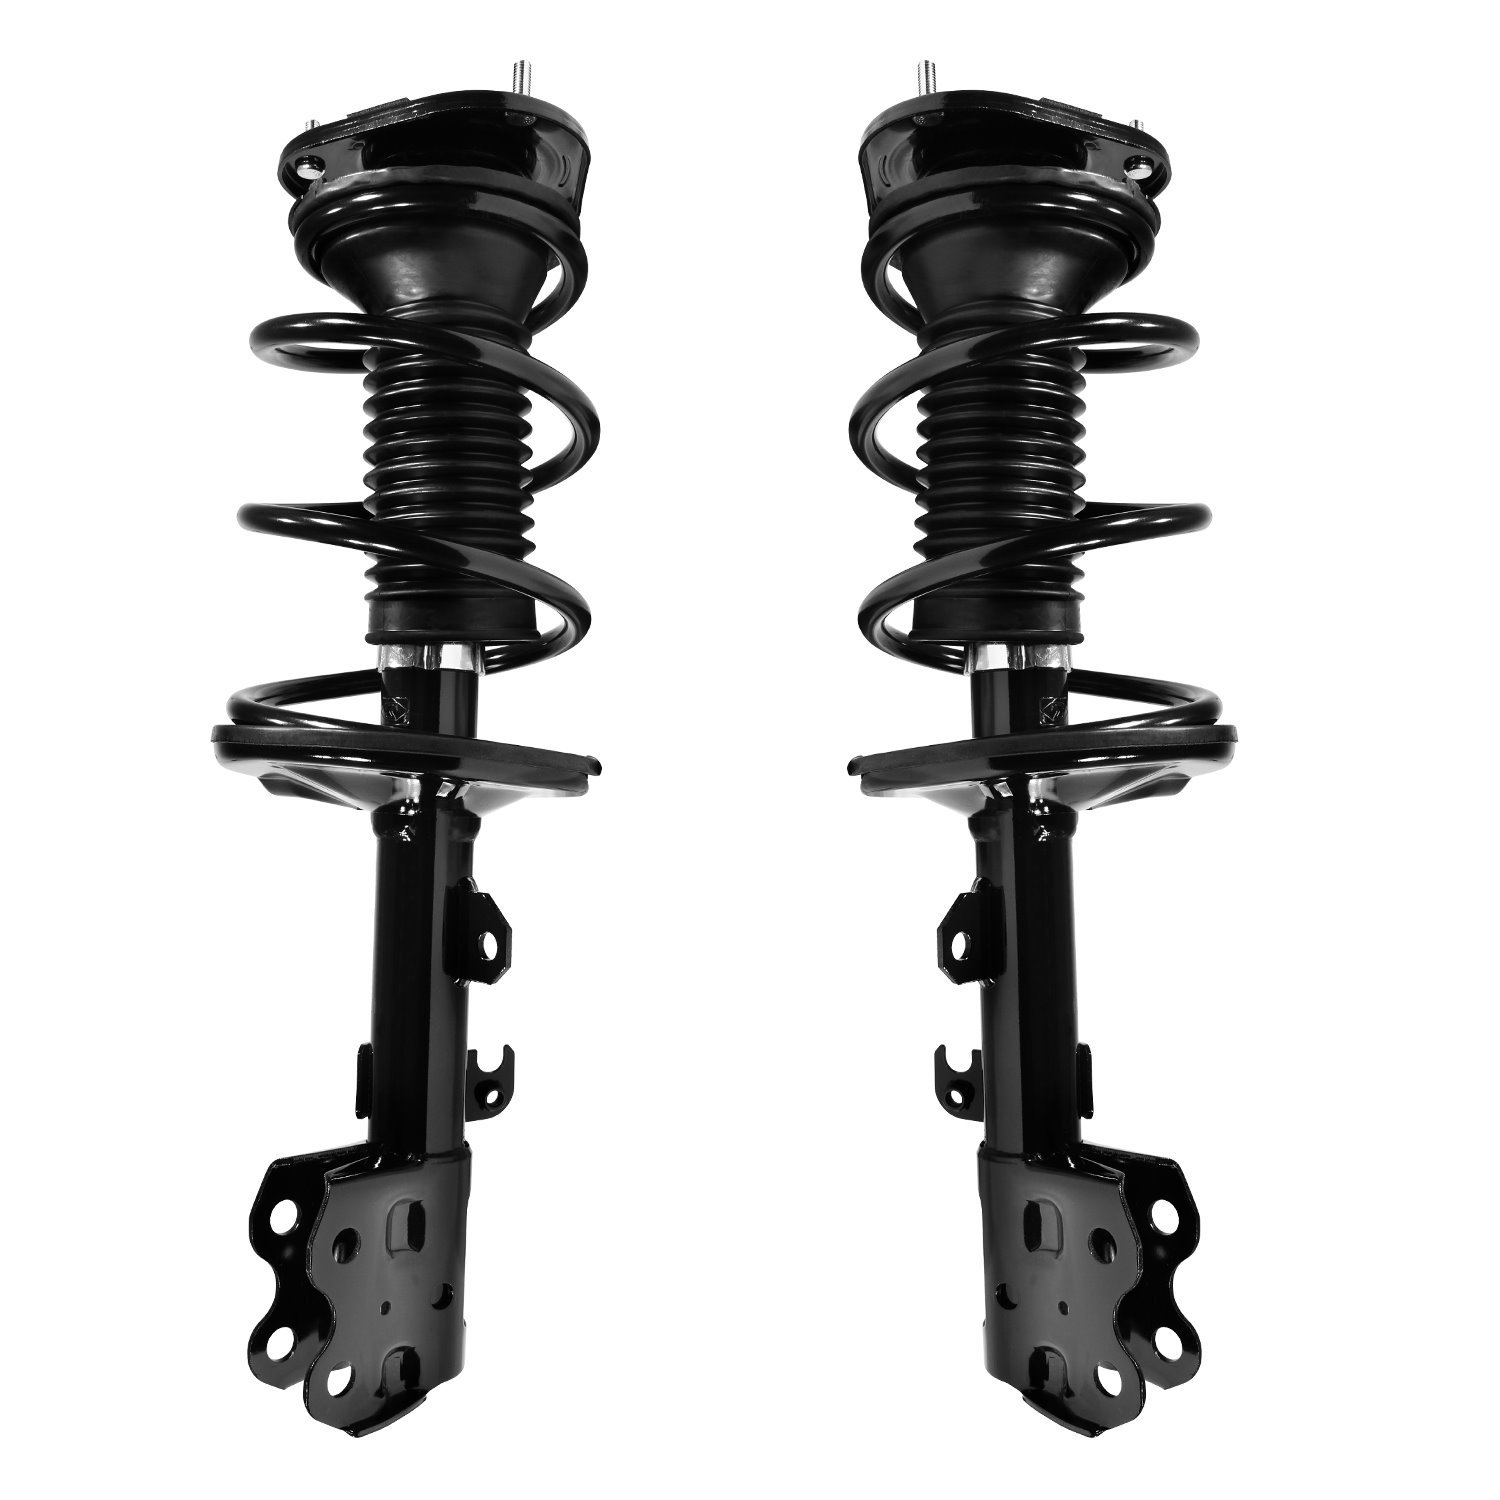 2-11101-11102-001 Suspension Strut & Coil Spring Assembly Set Fits Select Toyota Prius